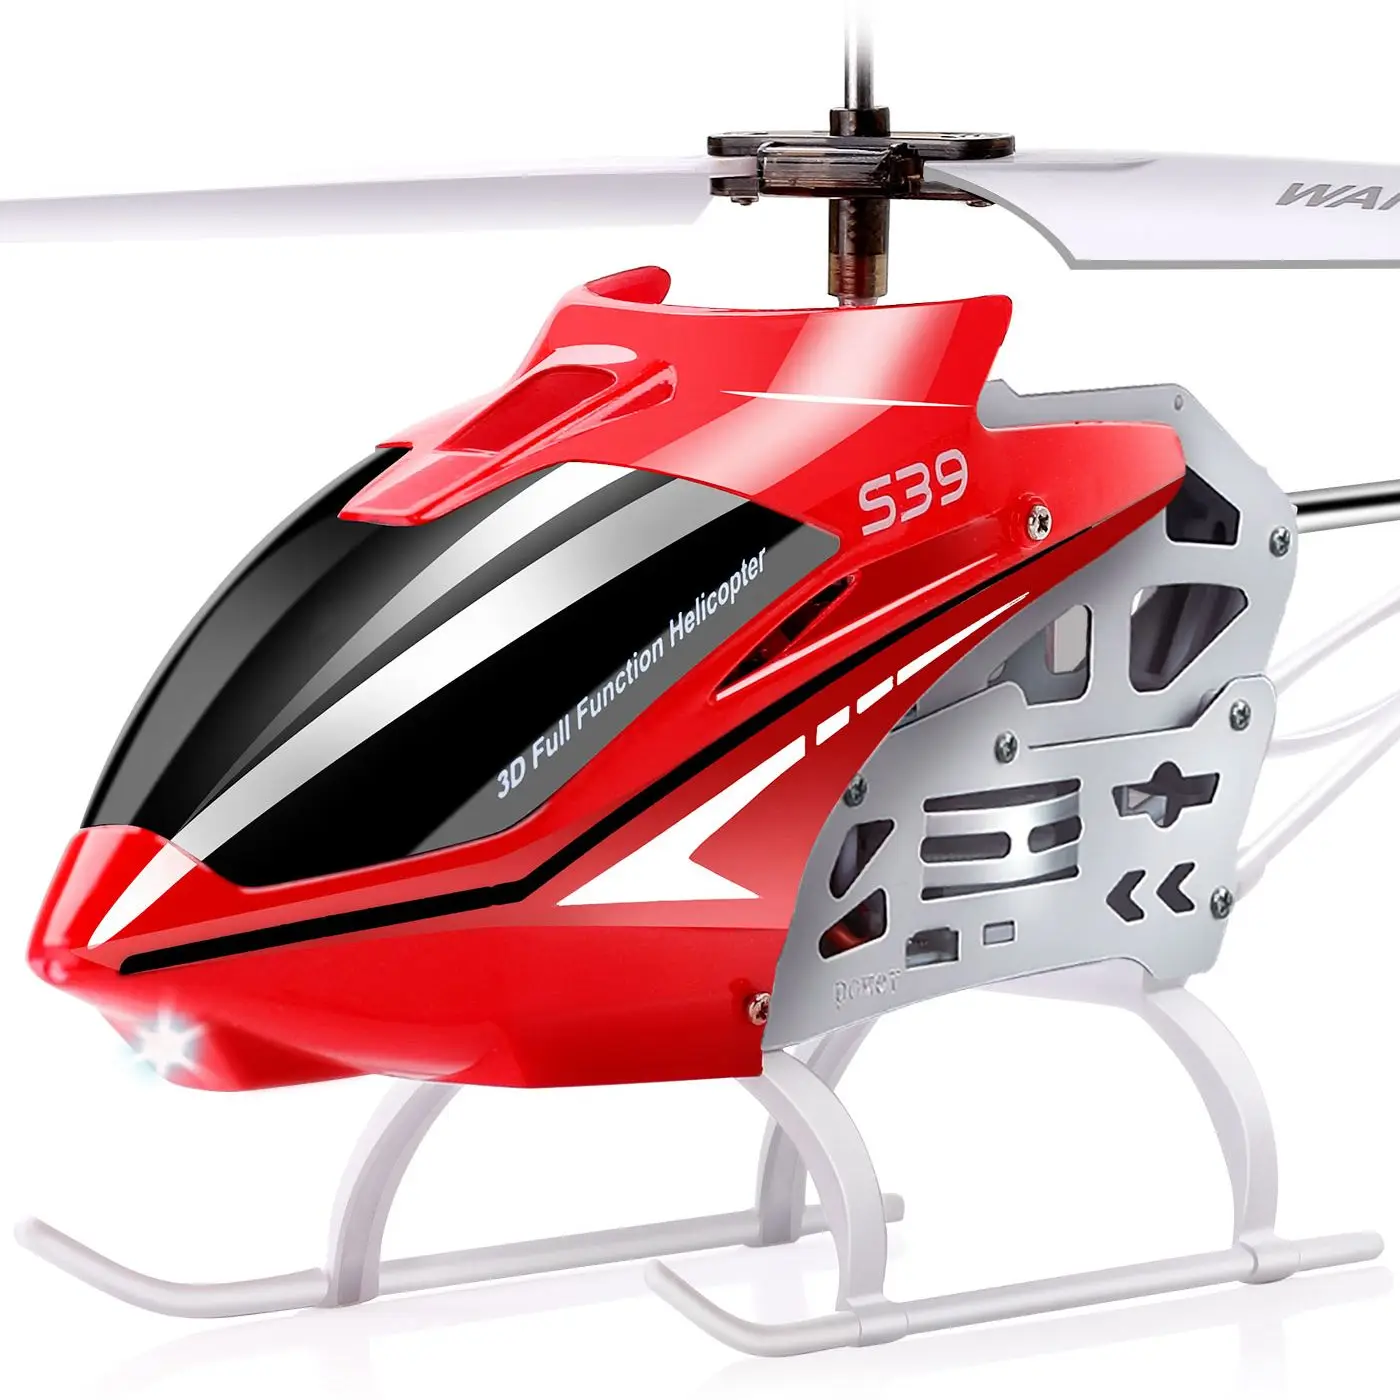 SYMA RC Helicopter S39 Aircraft with 3.5 Channel Bigger Size Sturdy Alloy Material Gyro Stabilizer and High&Low Speed Drone